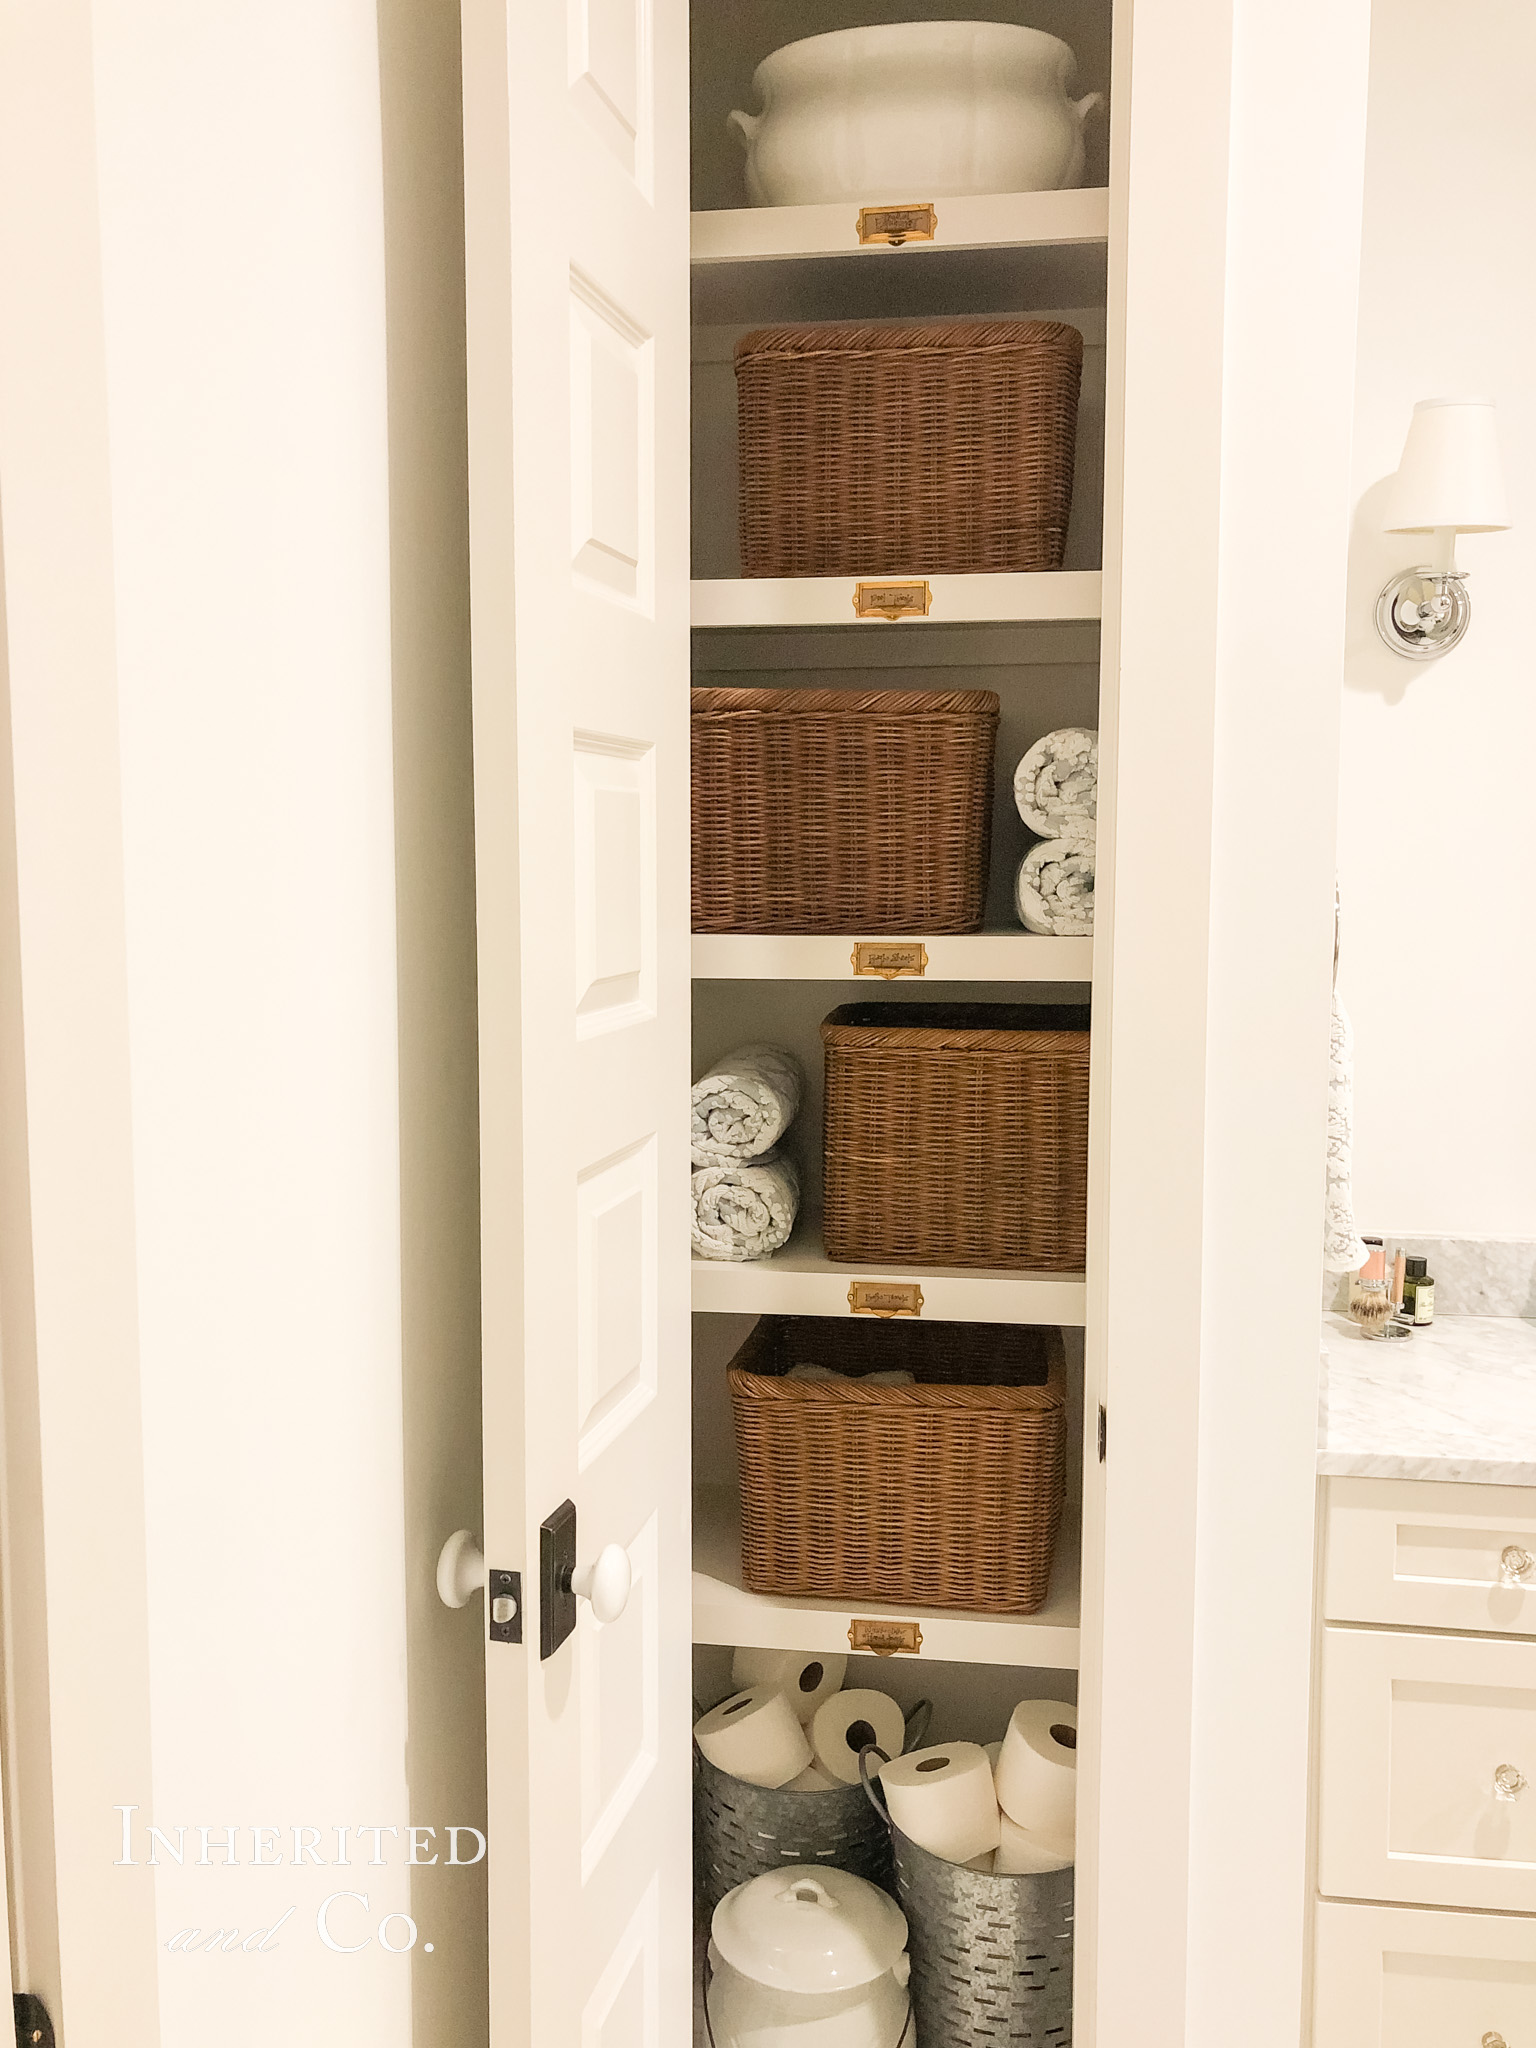 Towel Closet Organization featuring rattan baskets, antique ironstone, and card catalog labels